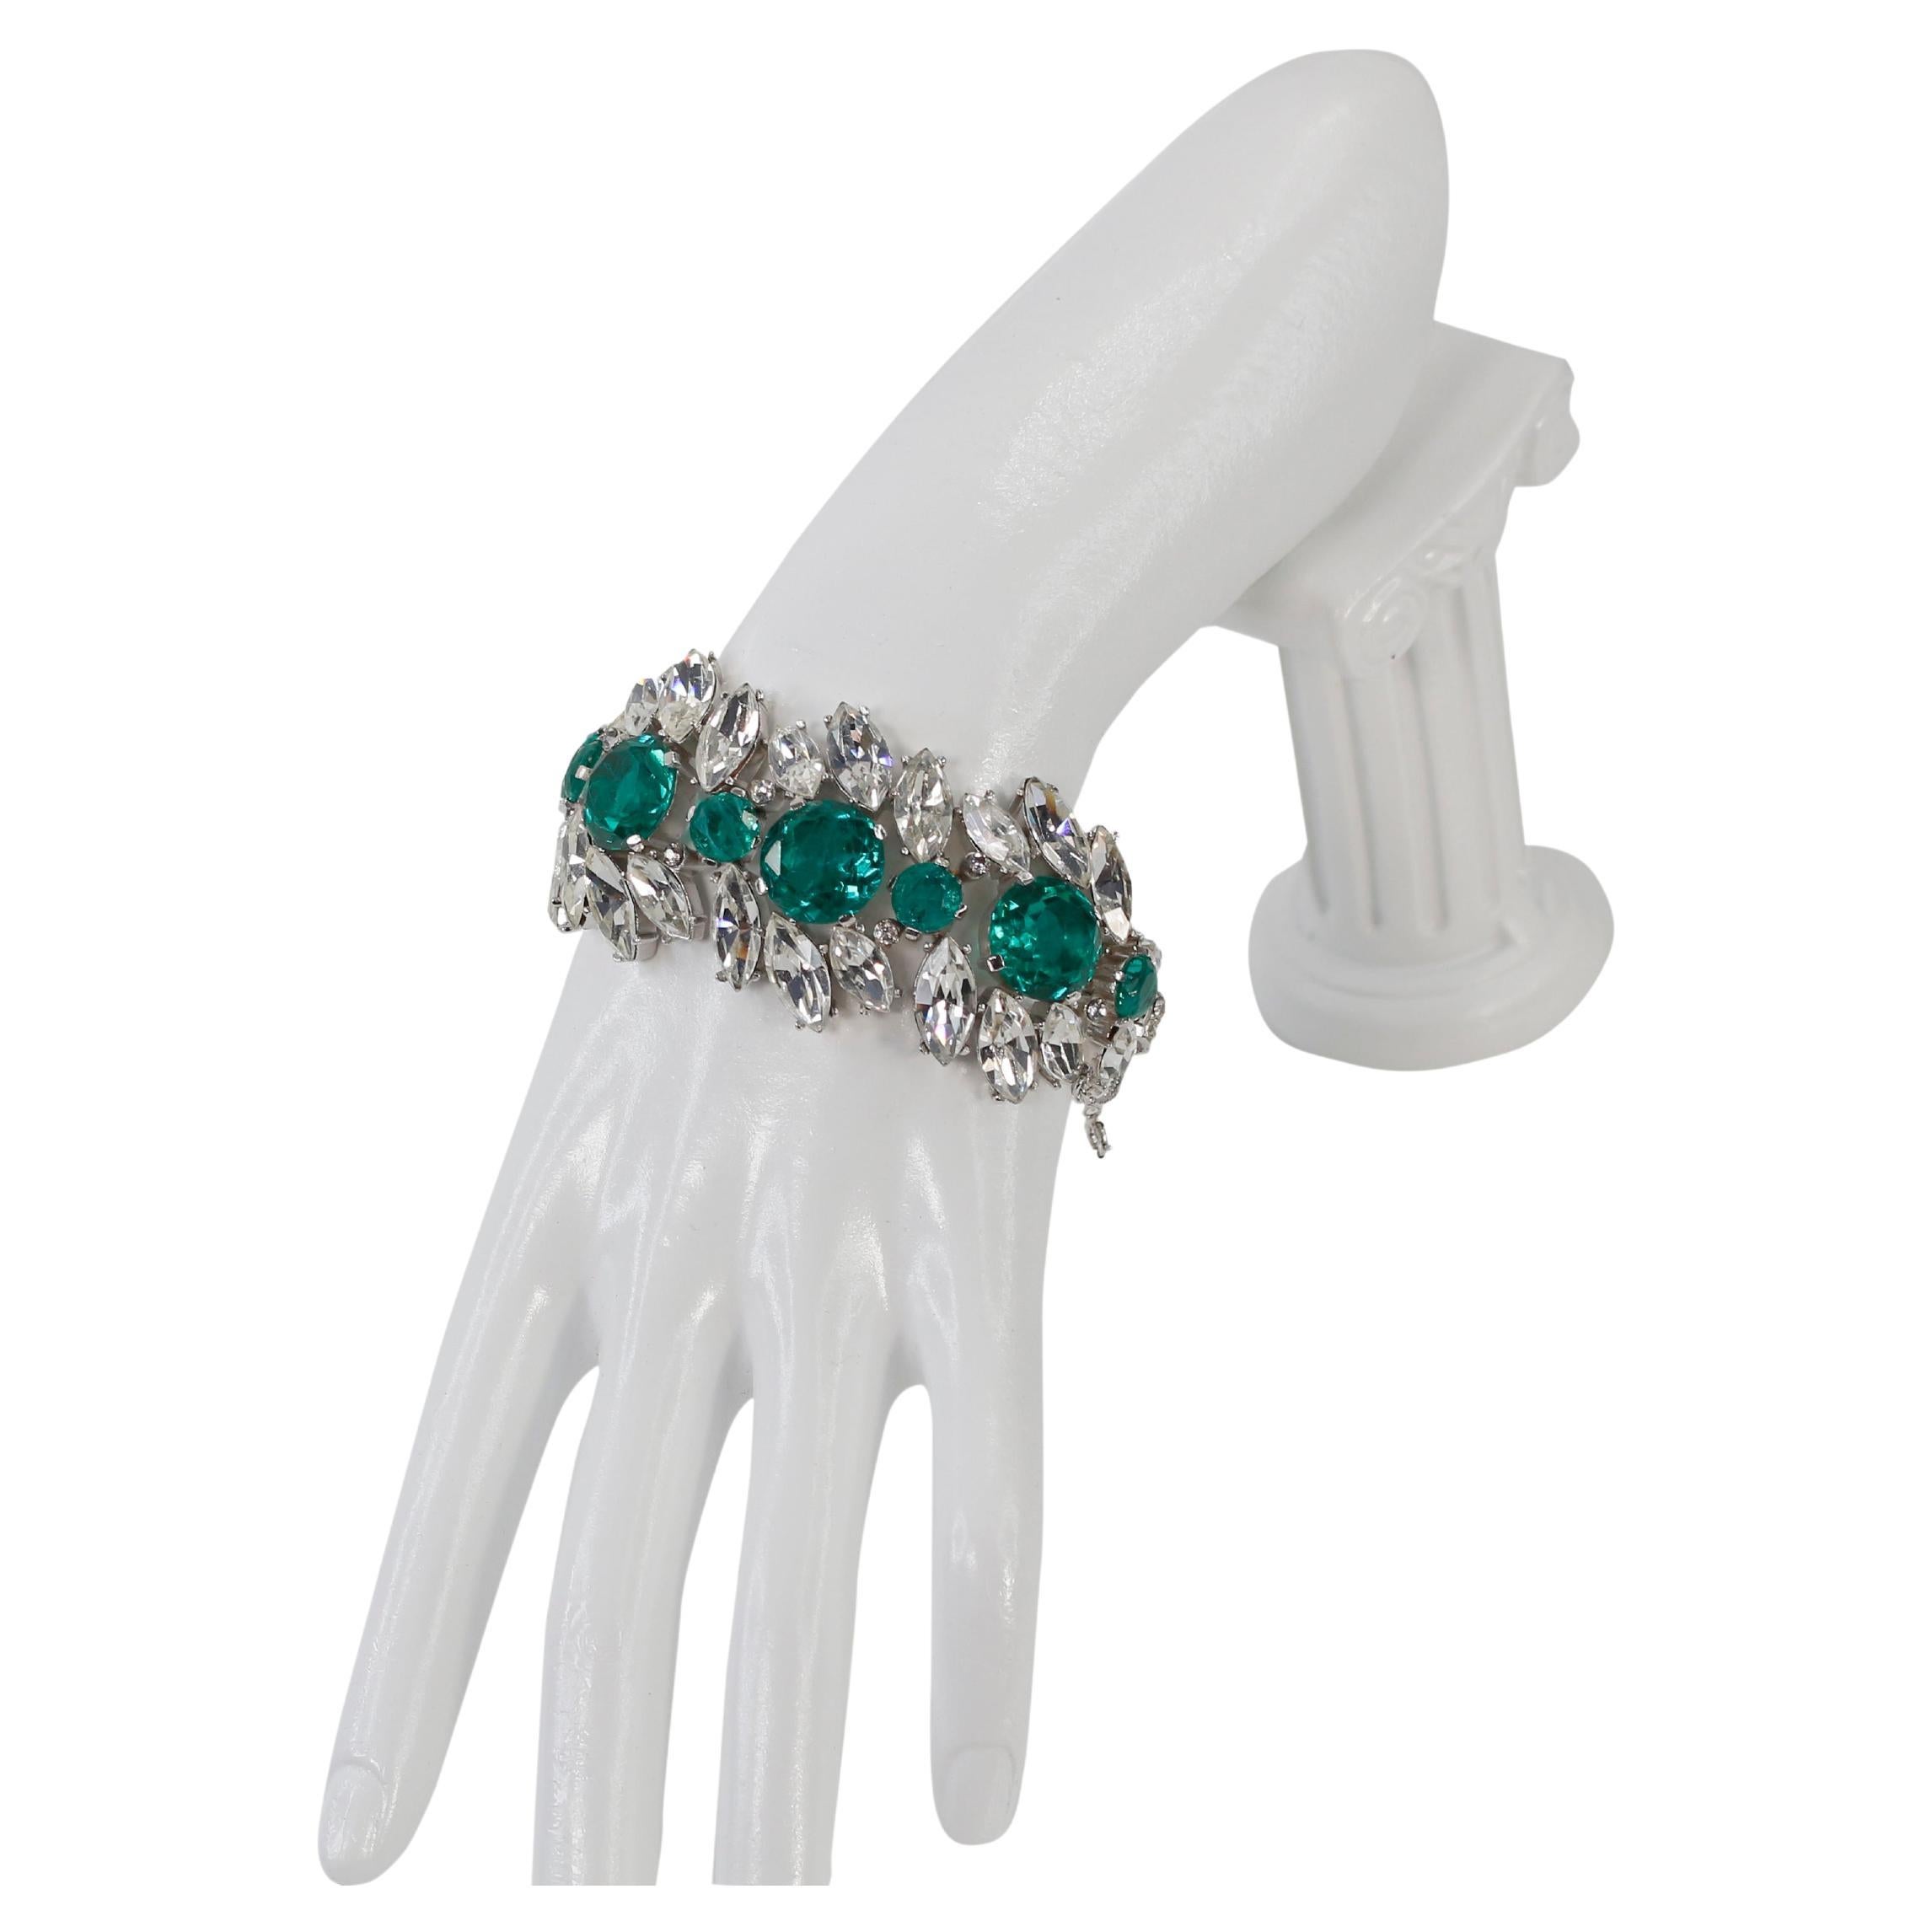 Vintage Trifari Emerald Green and Crystal Bracelet Circa 1960s For Sale